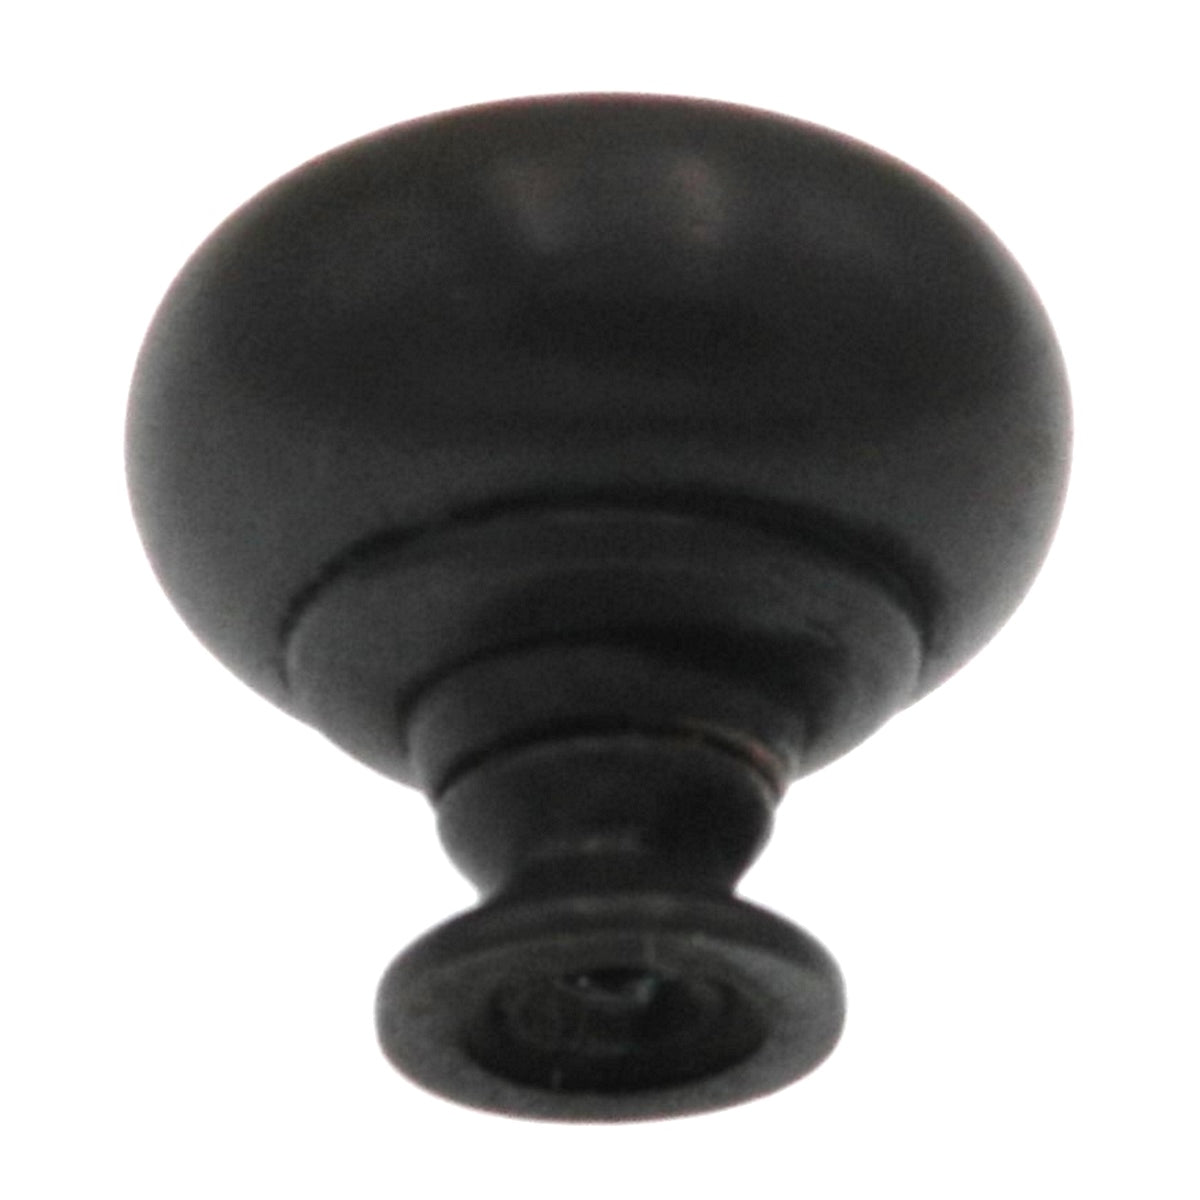 10 Pack Warwick Traditional Oil-Rubbed Bronze 1 1/4" Smooth Cabinet Knob Pull DH1029BZ